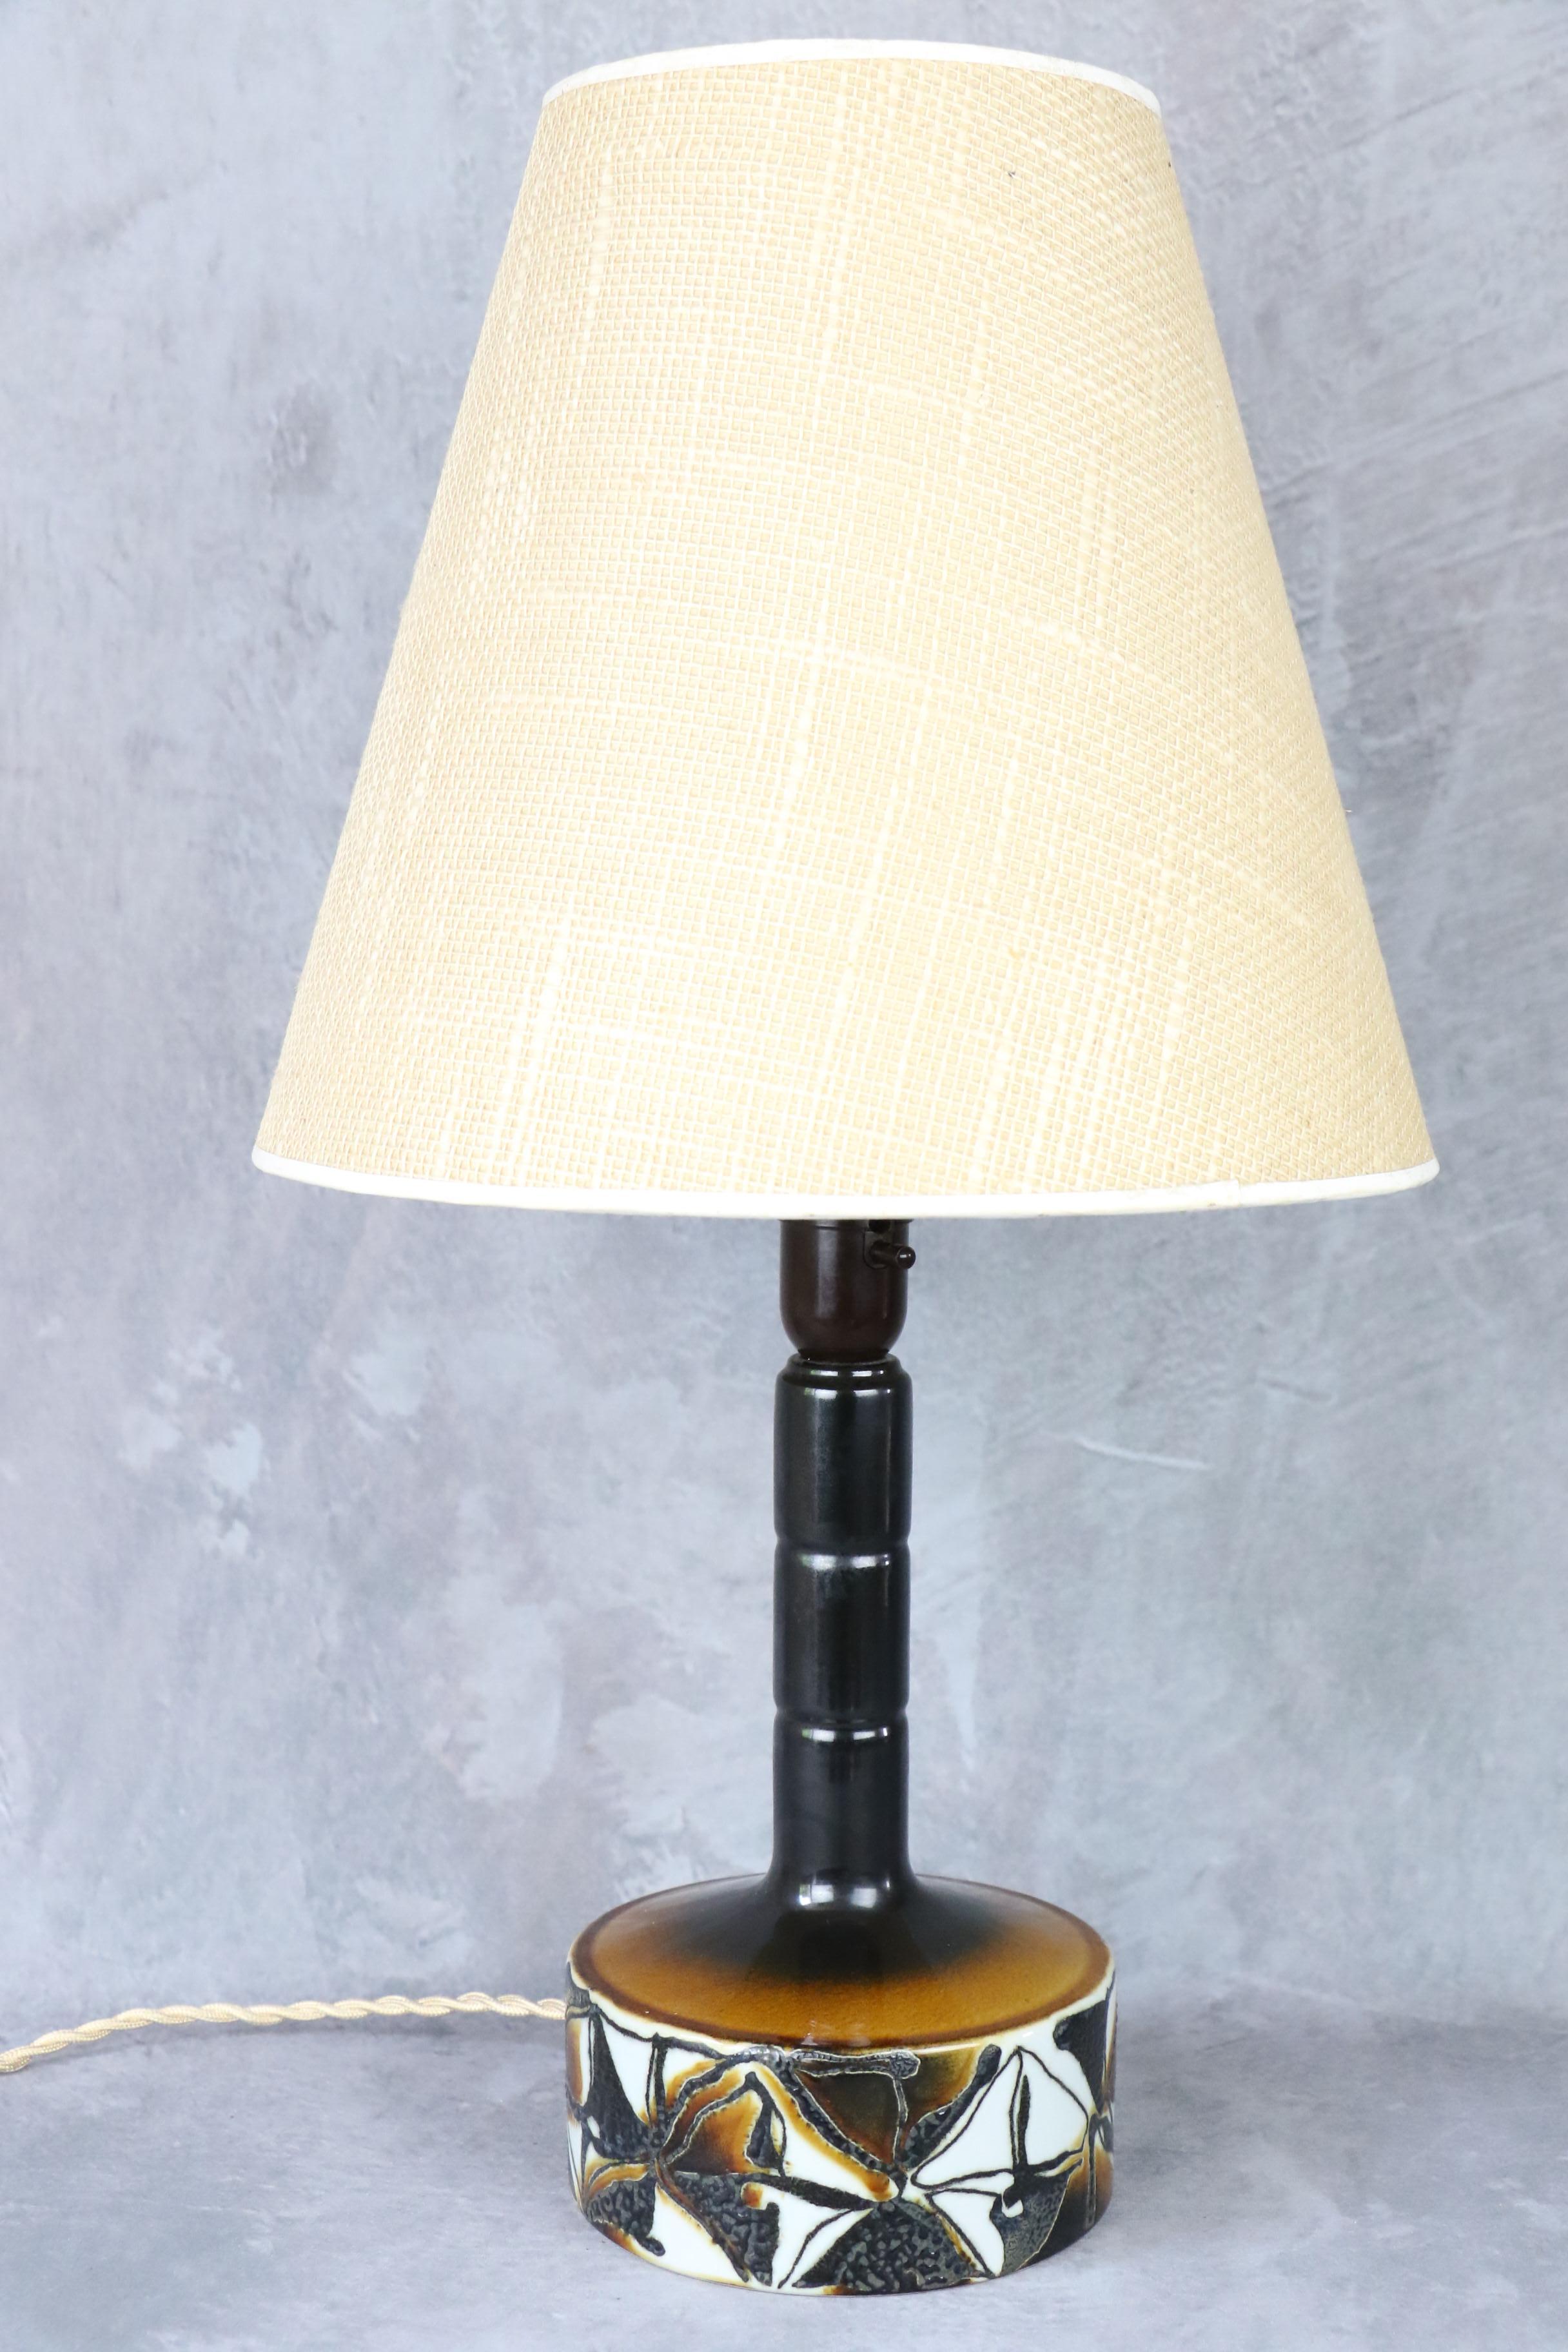 Ceramic Midcentury Lamp by Royal Copenhagen, Denmark, 1960s

Bell Danish lamp by Royal Copenhagen, it is enamelled in autumnal colours and has an elegant play of textures between a smooth white enamel and a slightly granulated black enamel.

It